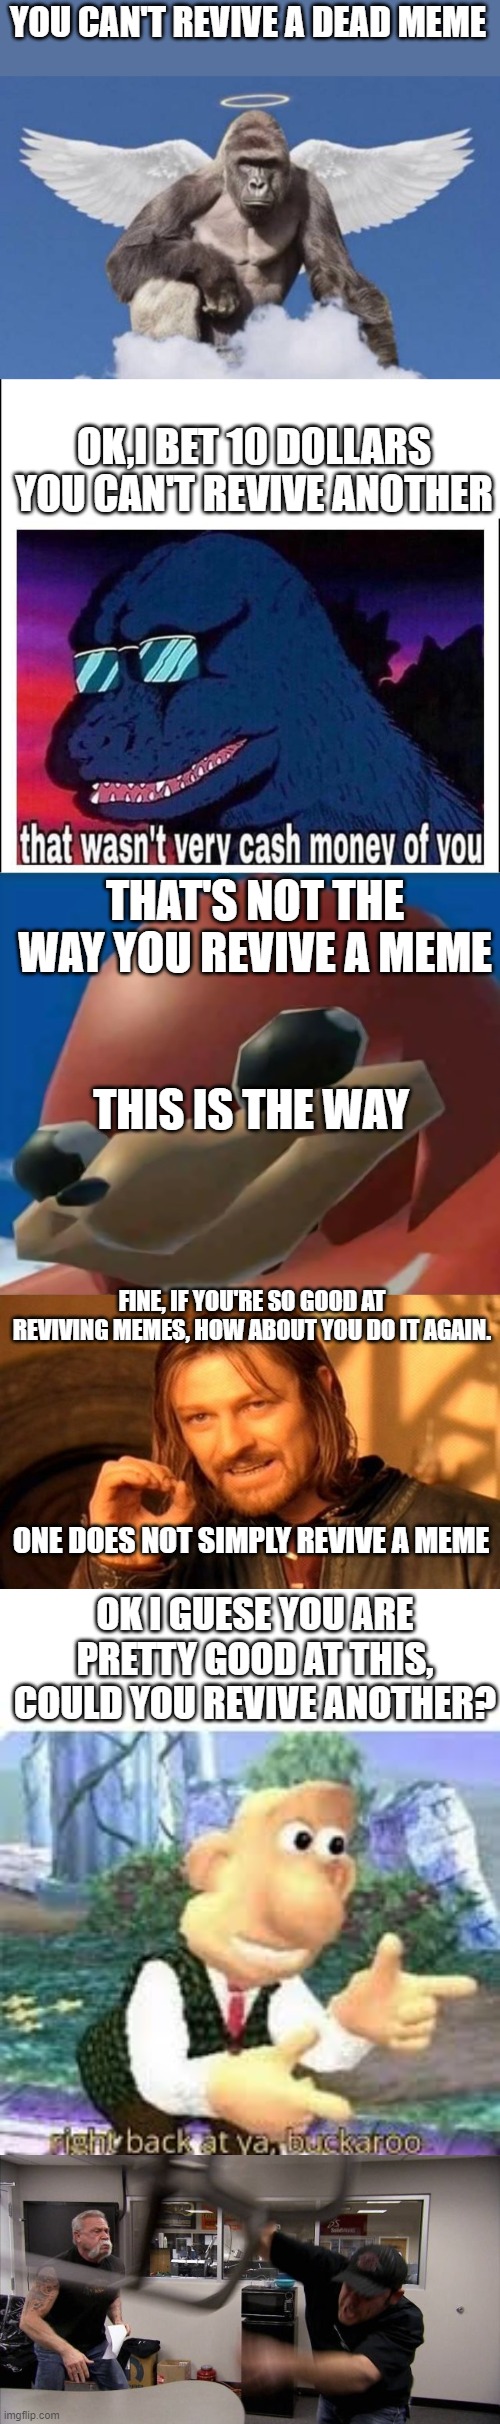 how did i do this | YOU CAN'T REVIVE A DEAD MEME; OK,I BET 10 DOLLARS YOU CAN'T REVIVE ANOTHER; THAT'S NOT THE WAY YOU REVIVE A MEME; THIS IS THE WAY; FINE, IF YOU'RE SO GOOD AT REVIVING MEMES, HOW ABOUT YOU DO IT AGAIN. ONE DOES NOT SIMPLY REVIVE A MEME; OK I GUESE YOU ARE PRETTY GOOD AT THIS, COULD YOU REVIVE ANOTHER? | image tagged in harambe,that wasn t very cash money,ugandan knuckles,memes,one does not simply,right back at ya buckaroo | made w/ Imgflip meme maker